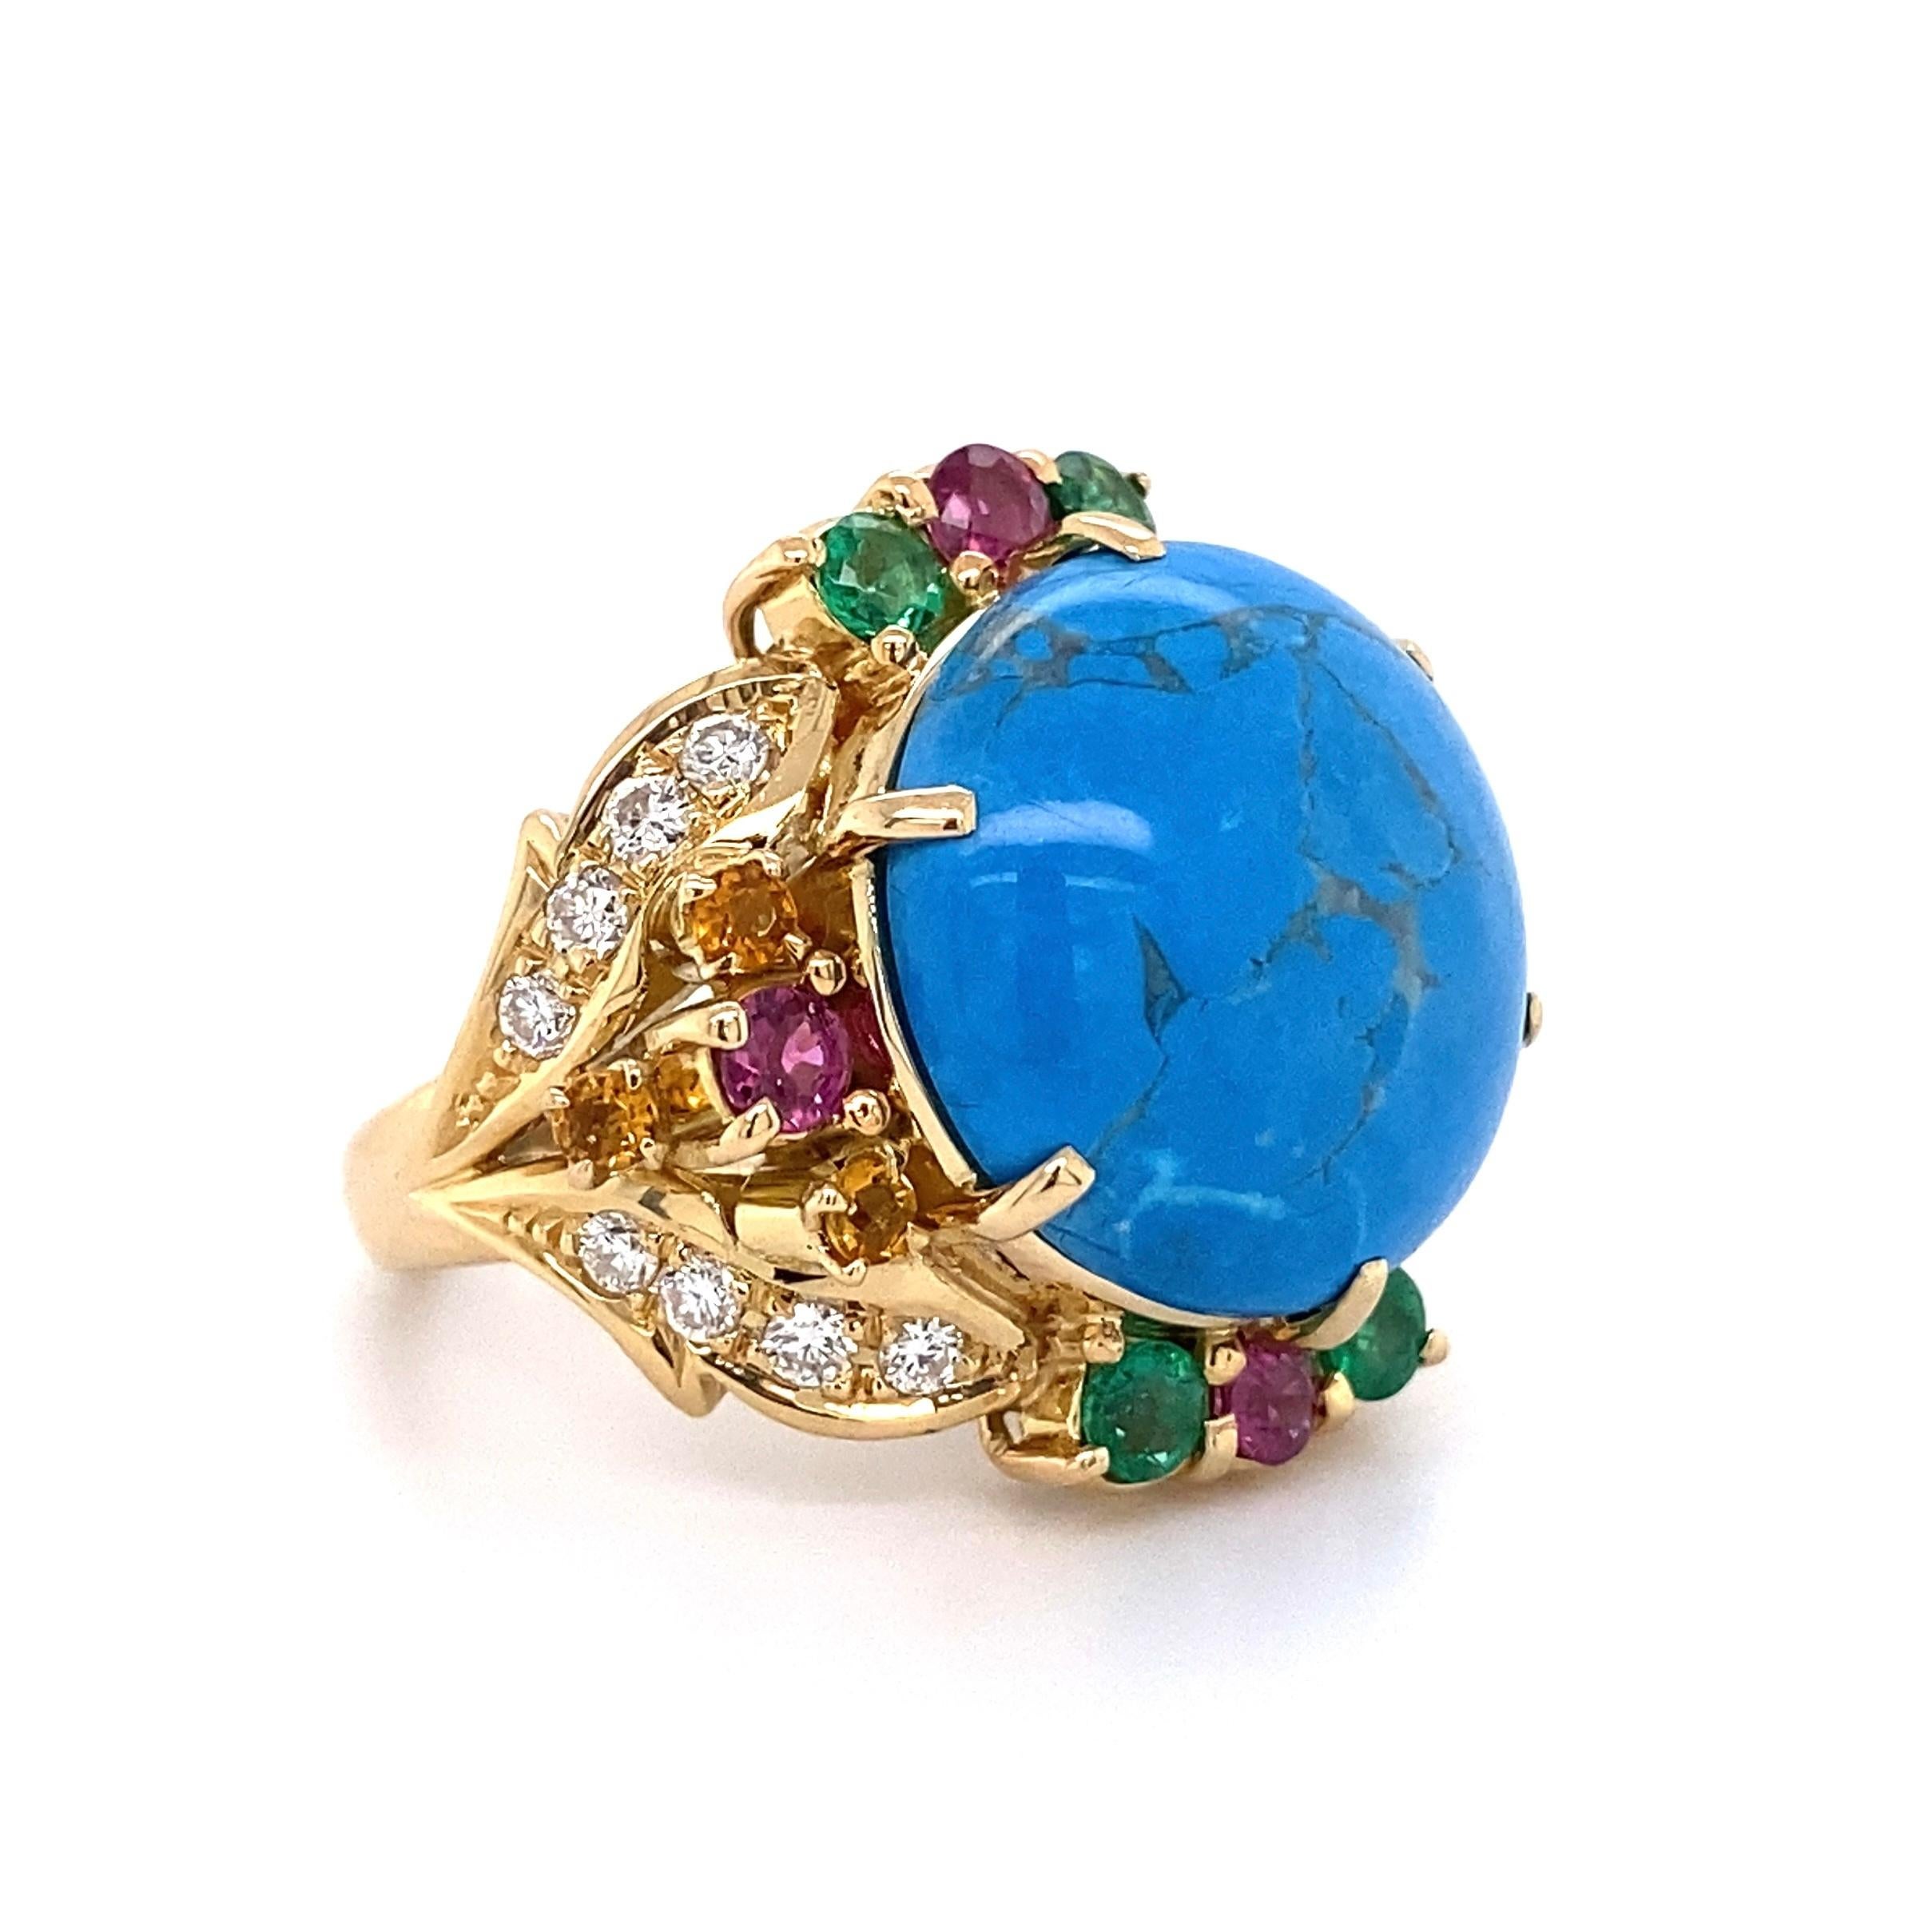 Fabulous and Stylish Turquoise Diamond Emerald Ruby and Diamond Gold Cocktail Ring. Center securely set with a Beautiful 5.50 Carat Cabochon Turquoise. Beautifully detailed surround Hand set with 16 round Brilliant-cut Diamonds approx. 41ctw, four